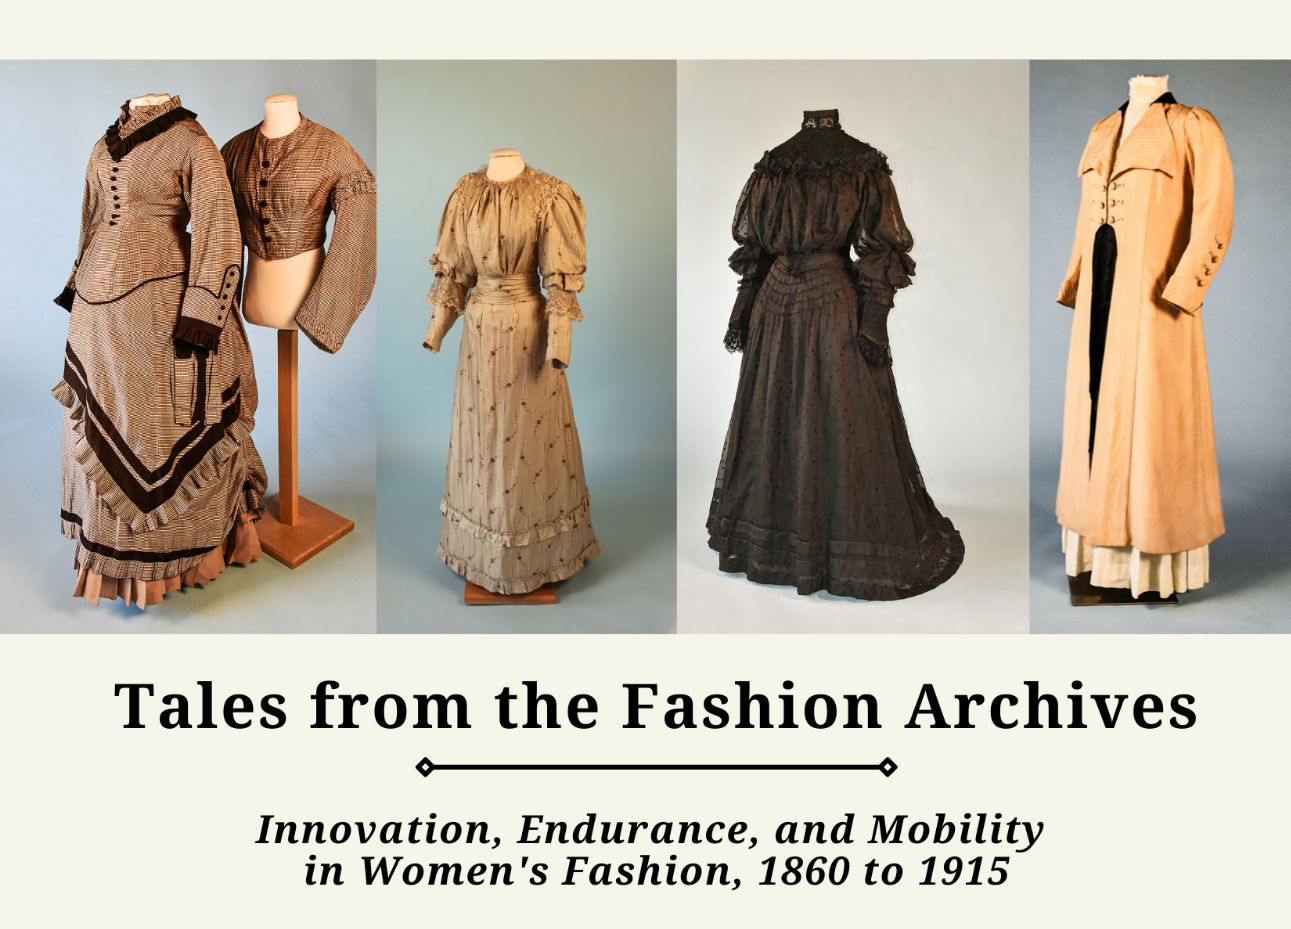 Tales from the Fashion Archives Exhibit – FA&M